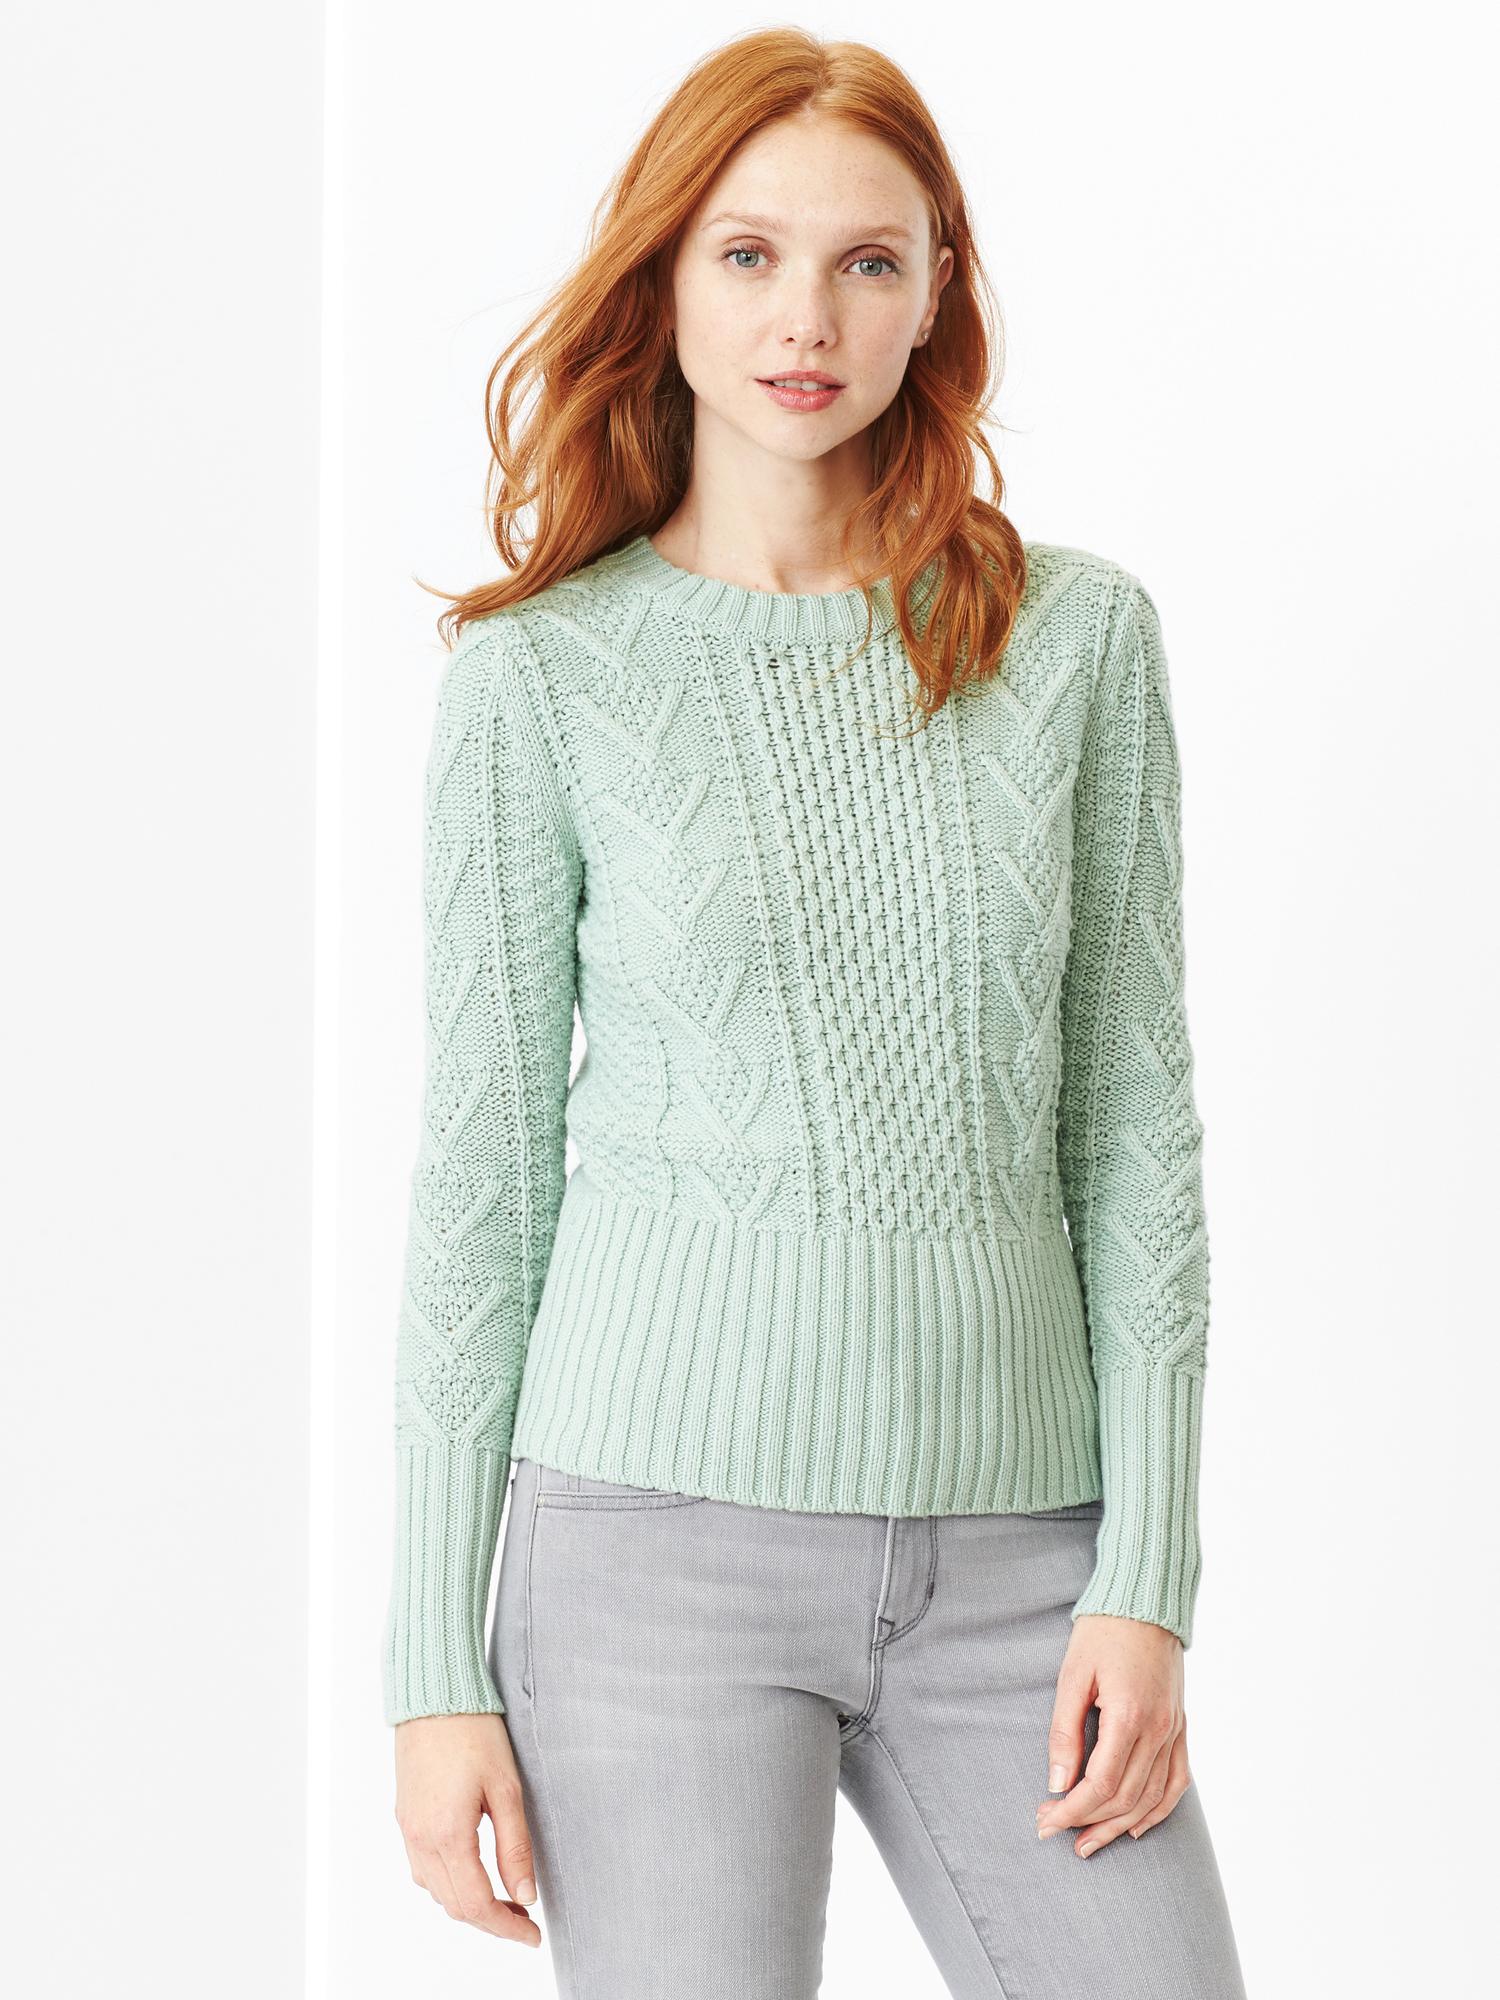 Cable knit sweater | Gap